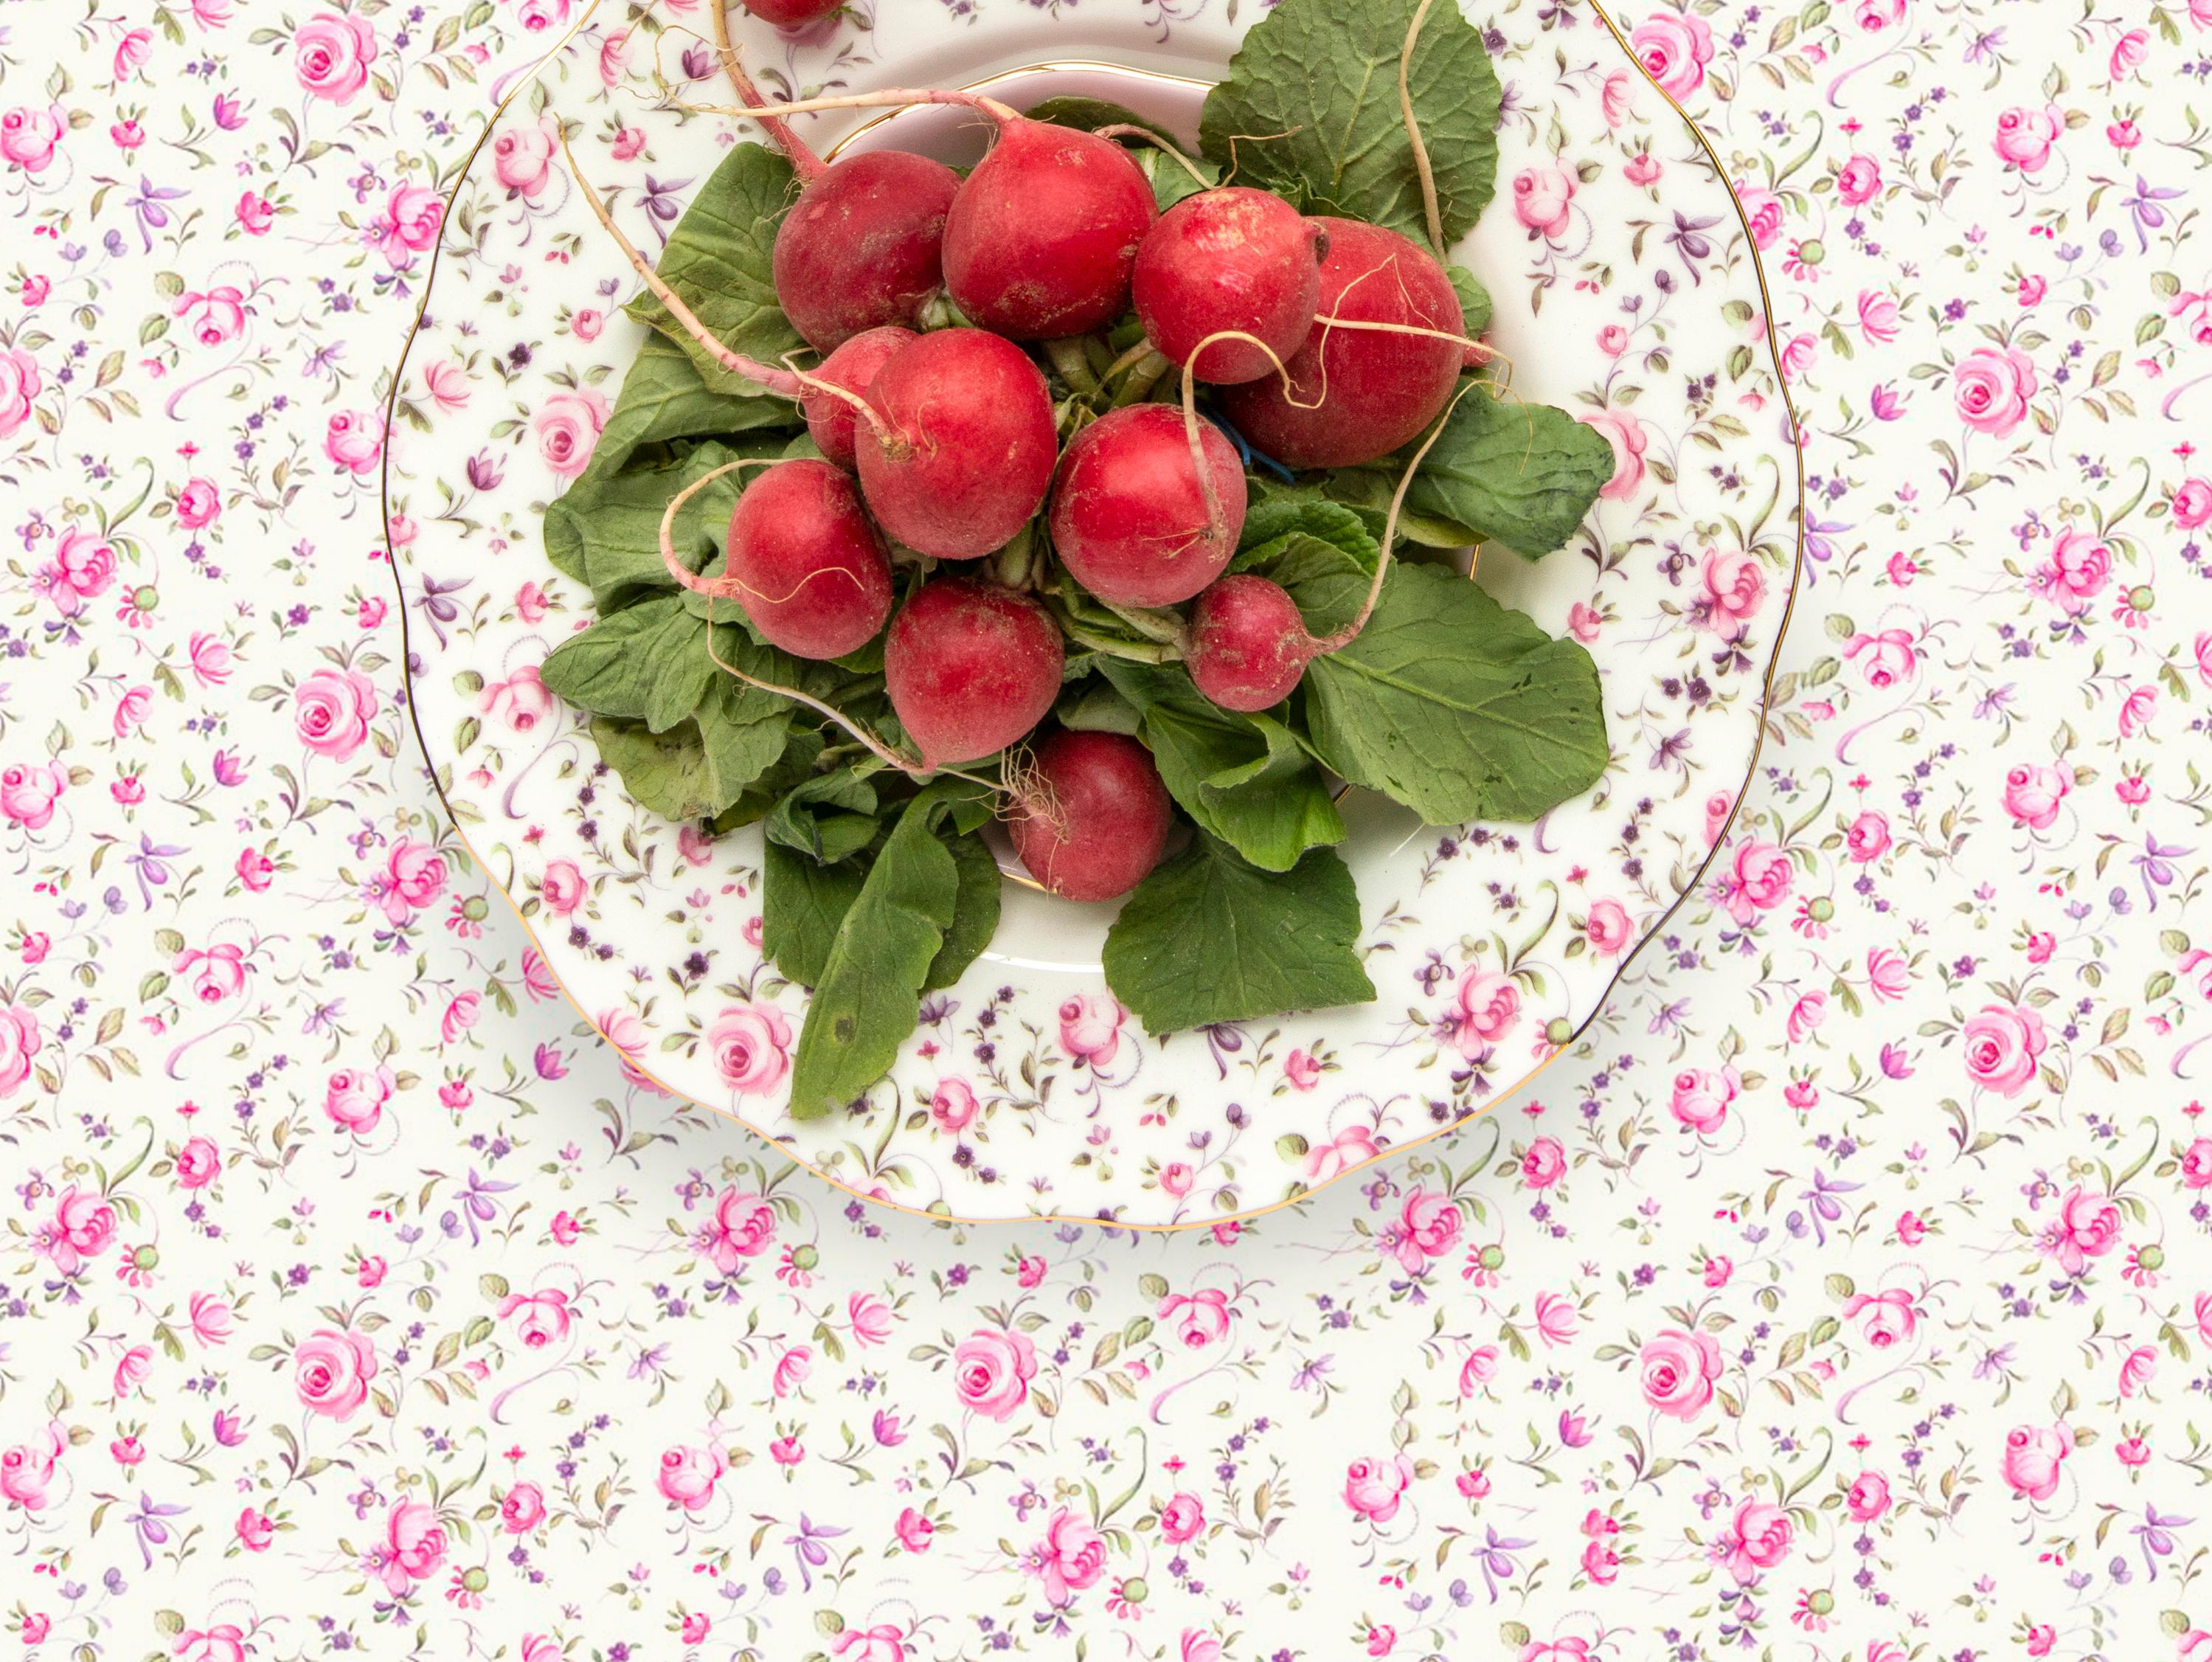 Royal Albert Rose Confetti with Radish - Pink & white floral food still life - Contemporary Photograph by JP Terlizzi